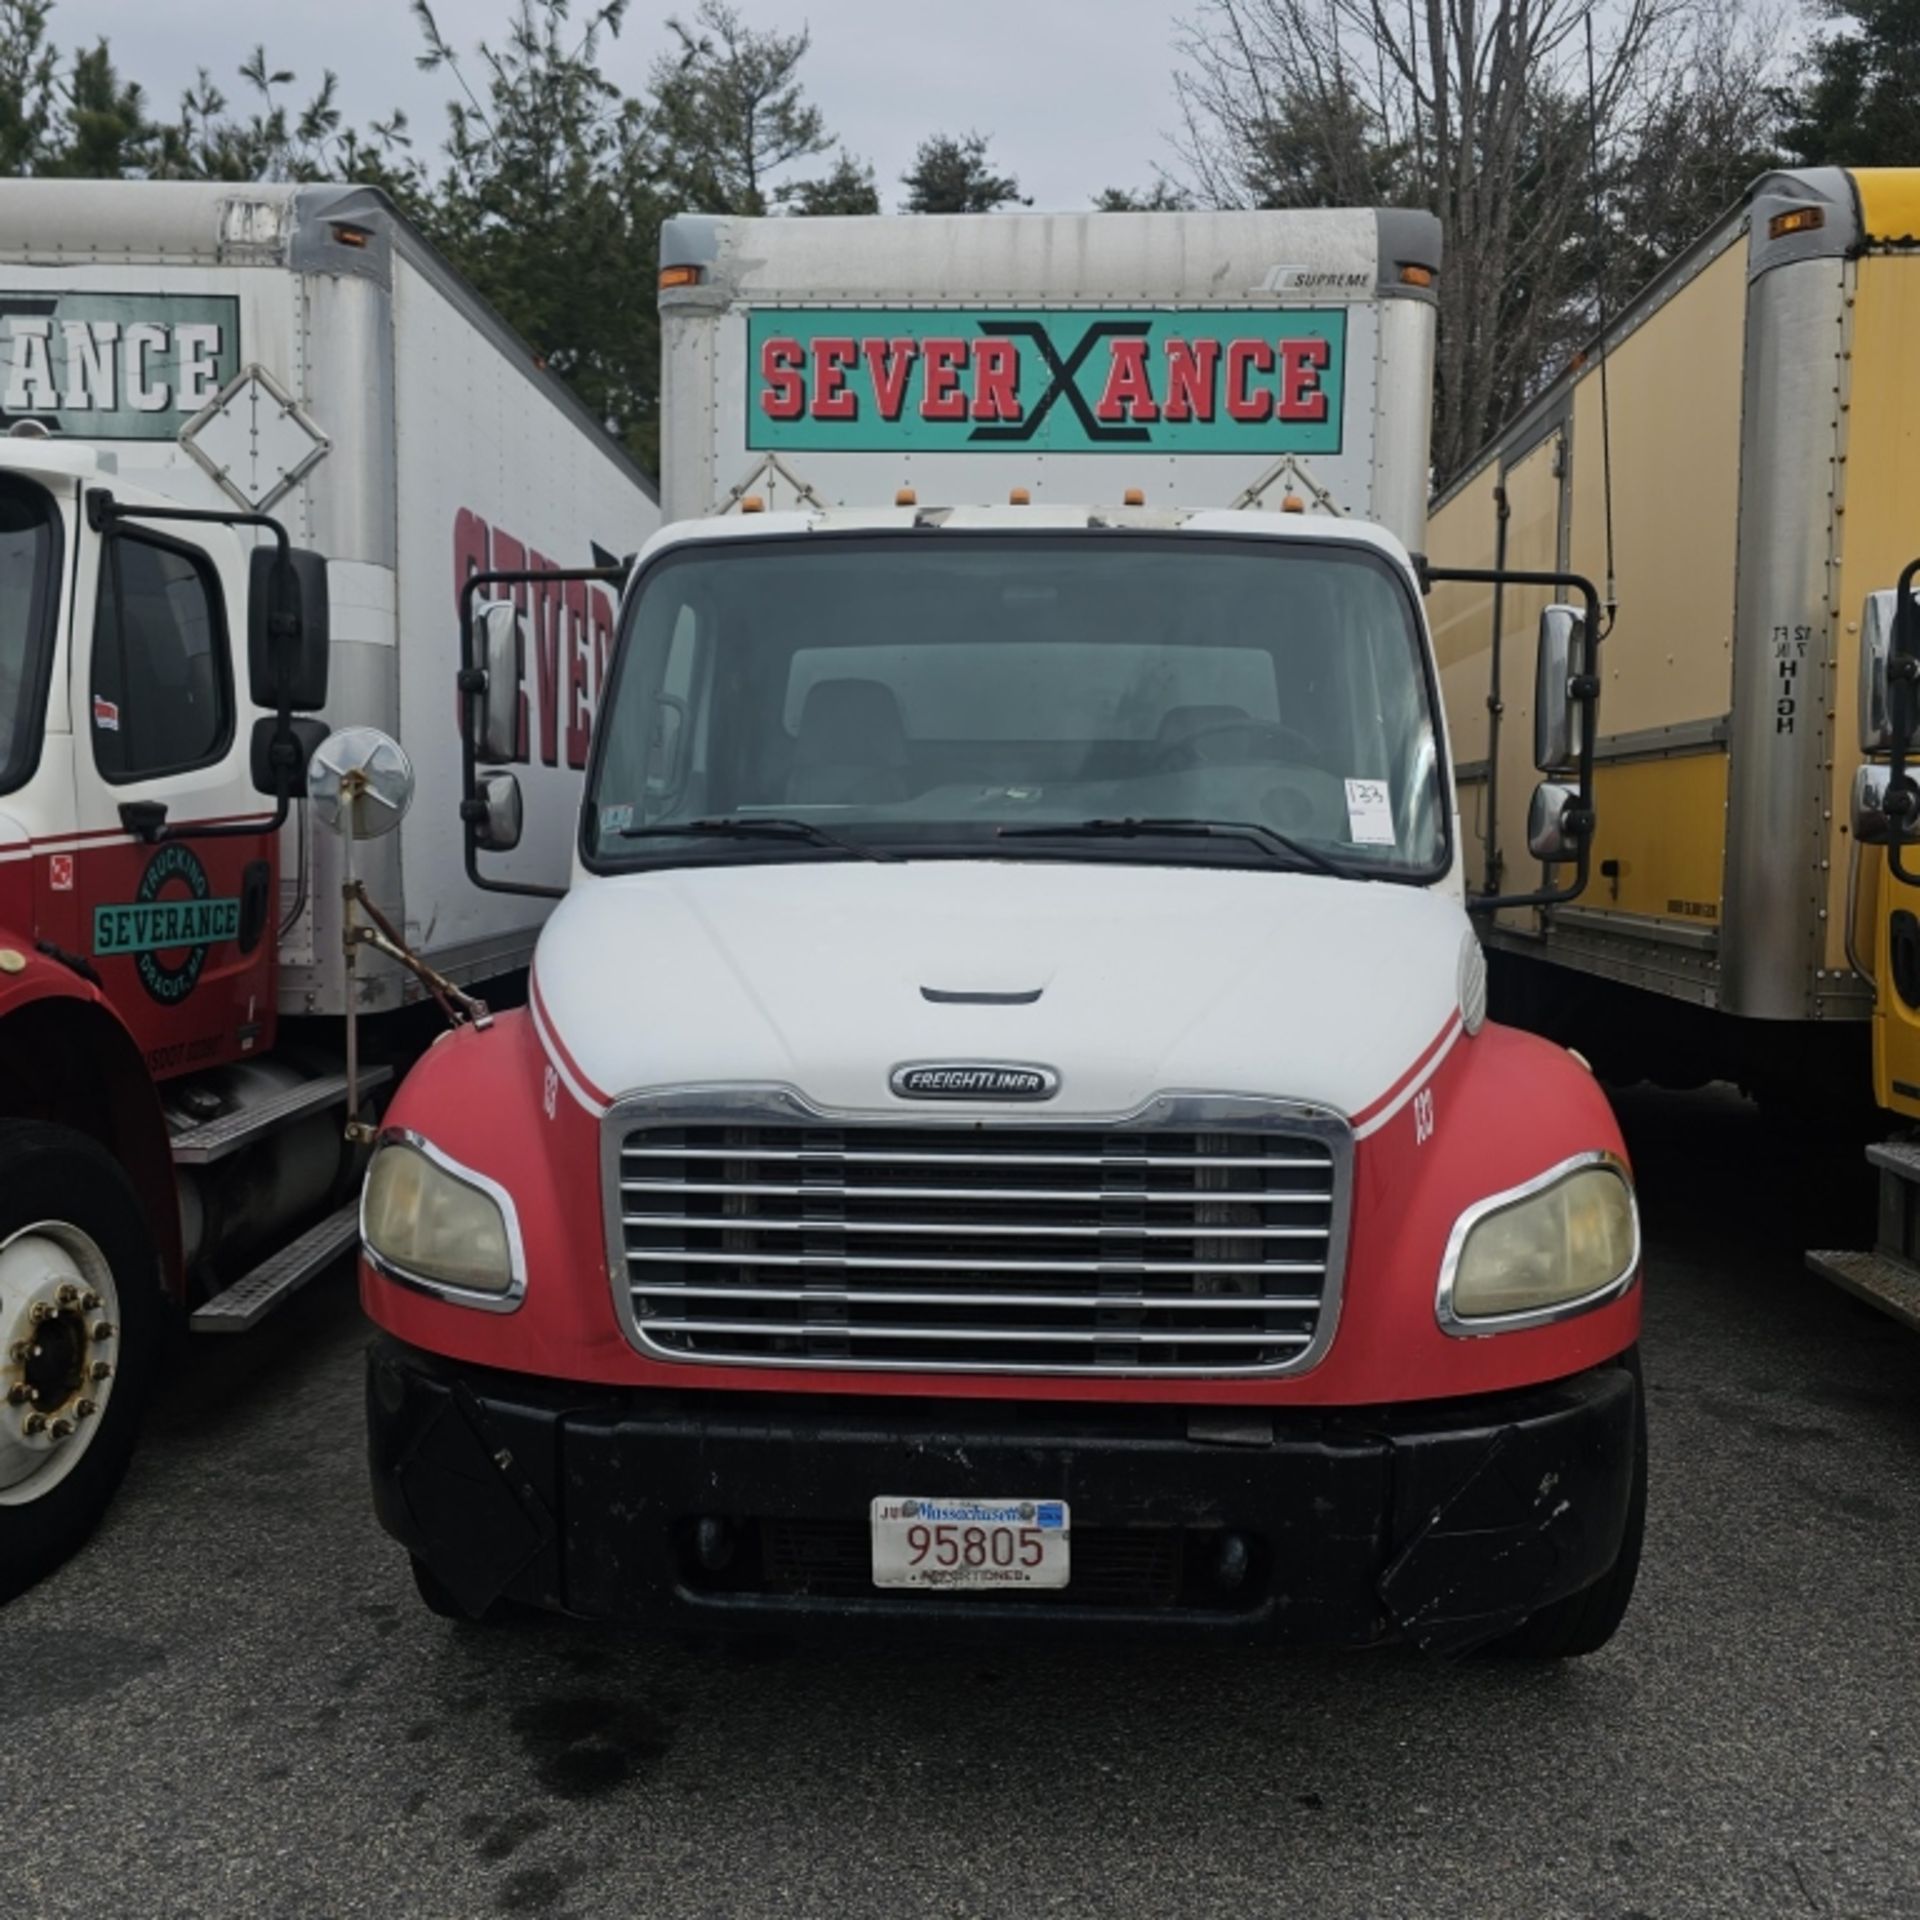 2005 Freightliner Box Truck - Image 2 of 10